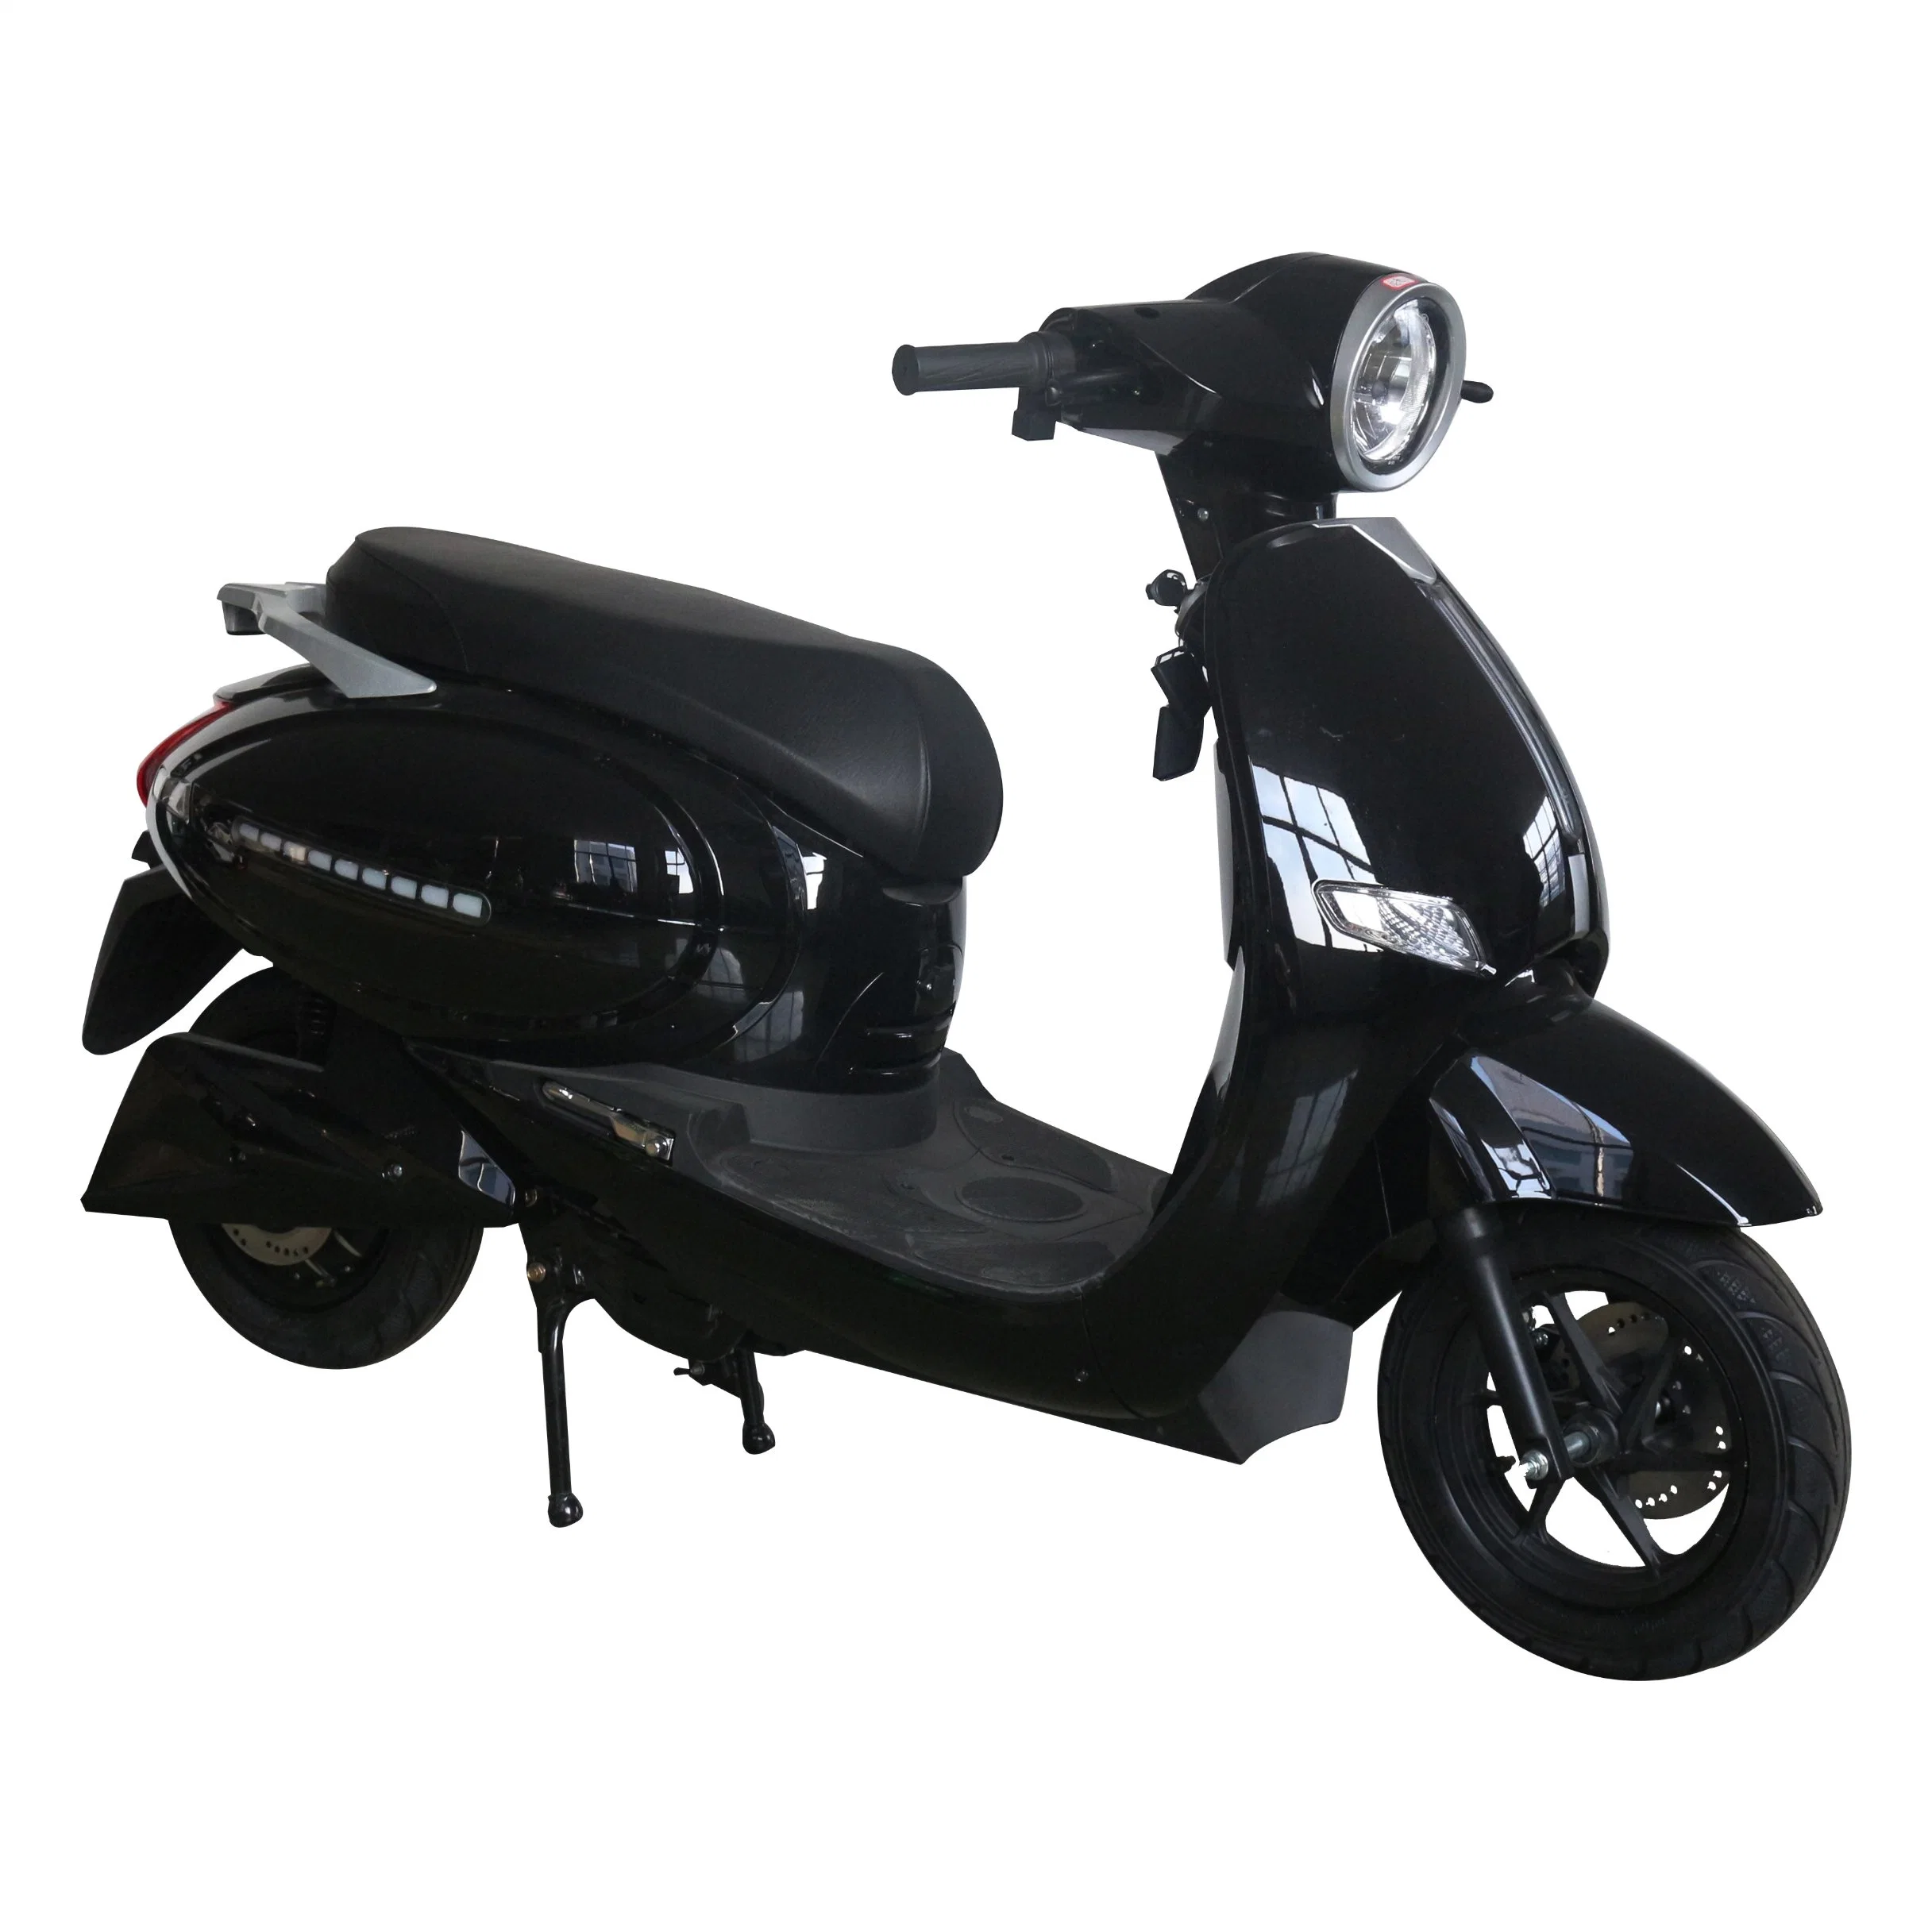 Sell Well Black 72V20ah Leadacid Battery/Lithium Battery Electric Scooter Bike for Man